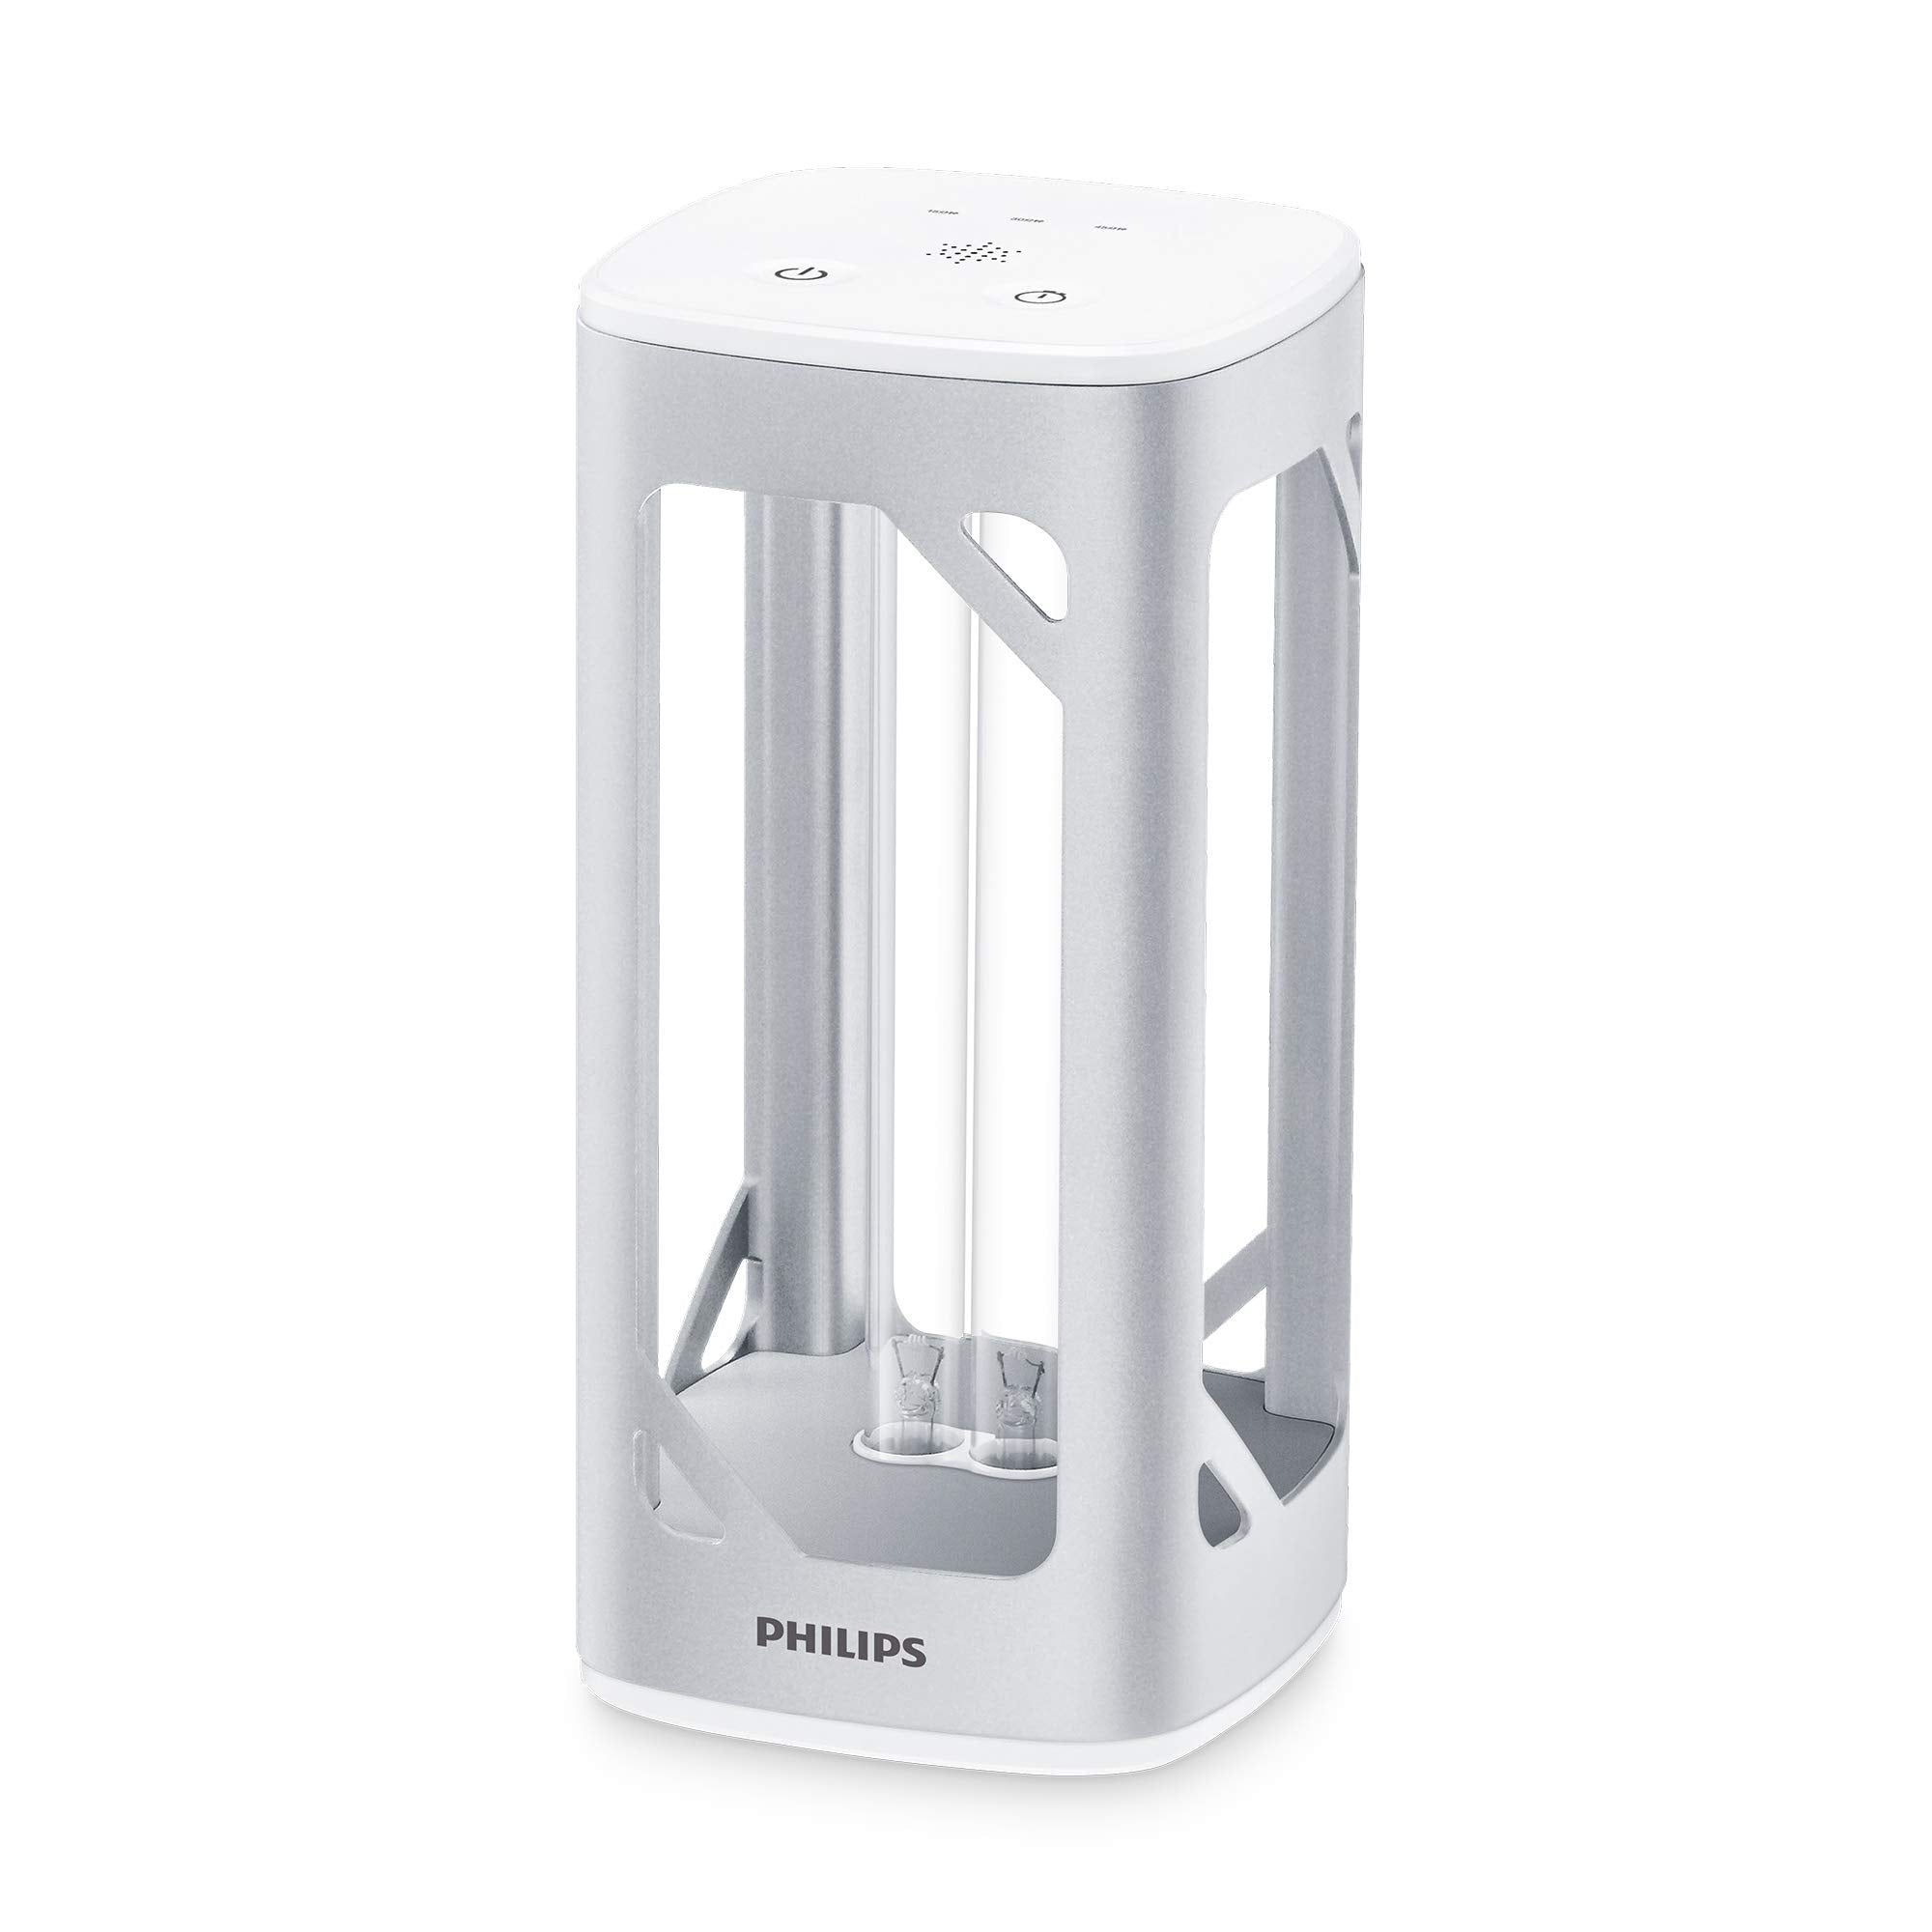 Philips UV-C Disinfection Desk Lamp for Home, Indoor, Hotel and Travel.